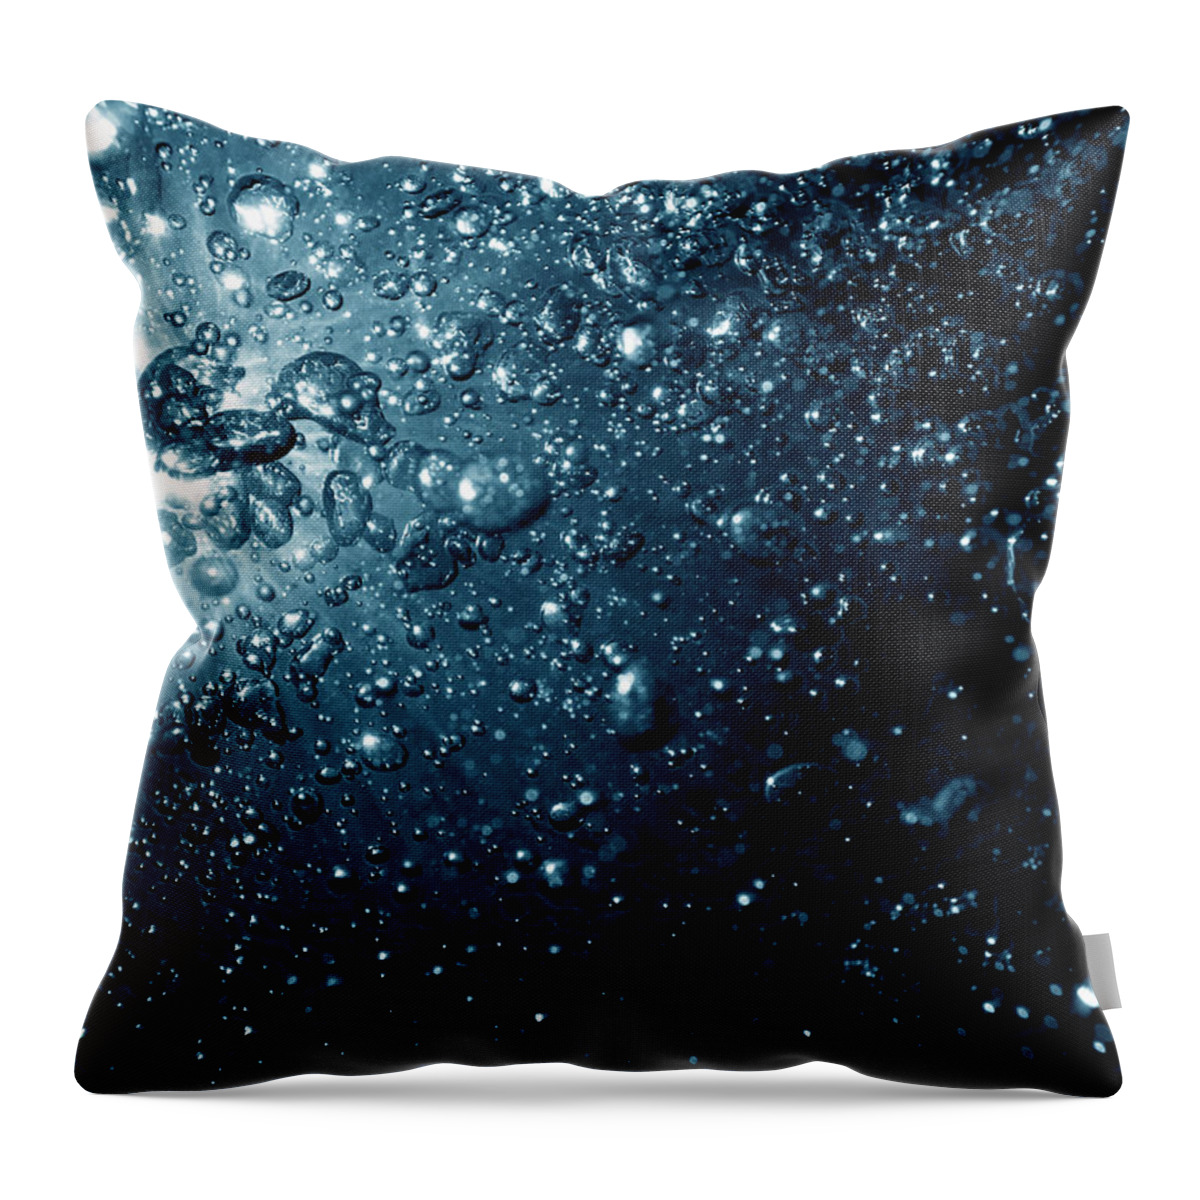 Underwater Throw Pillow featuring the photograph Underwater Bubble Pattern by Christopher Johnson